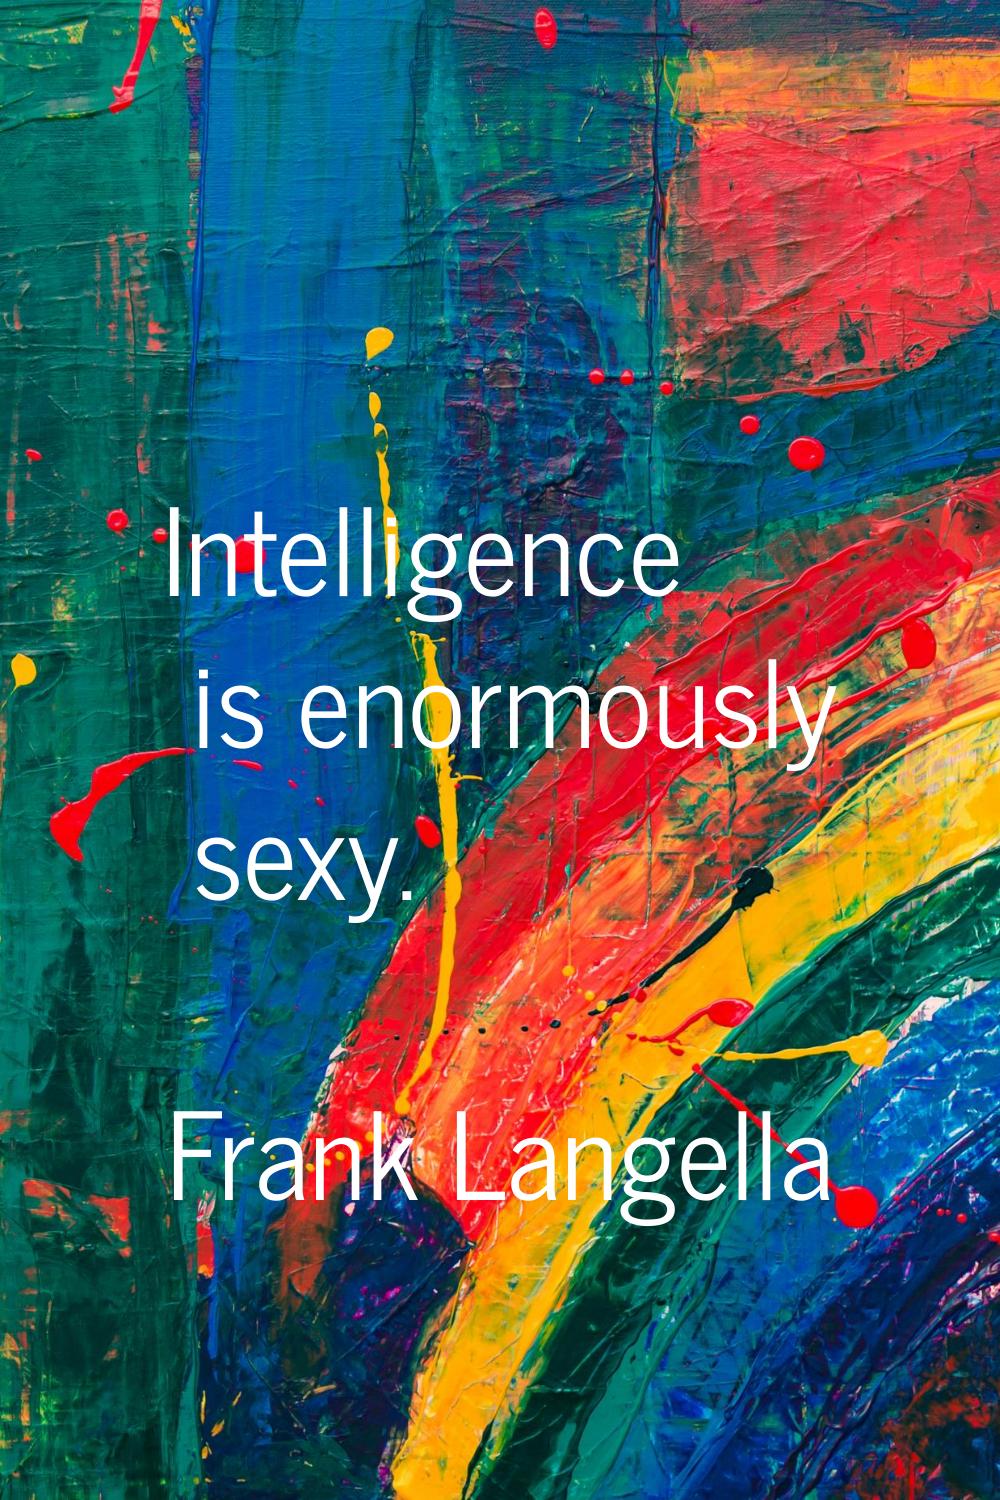 Intelligence is enormously sexy.